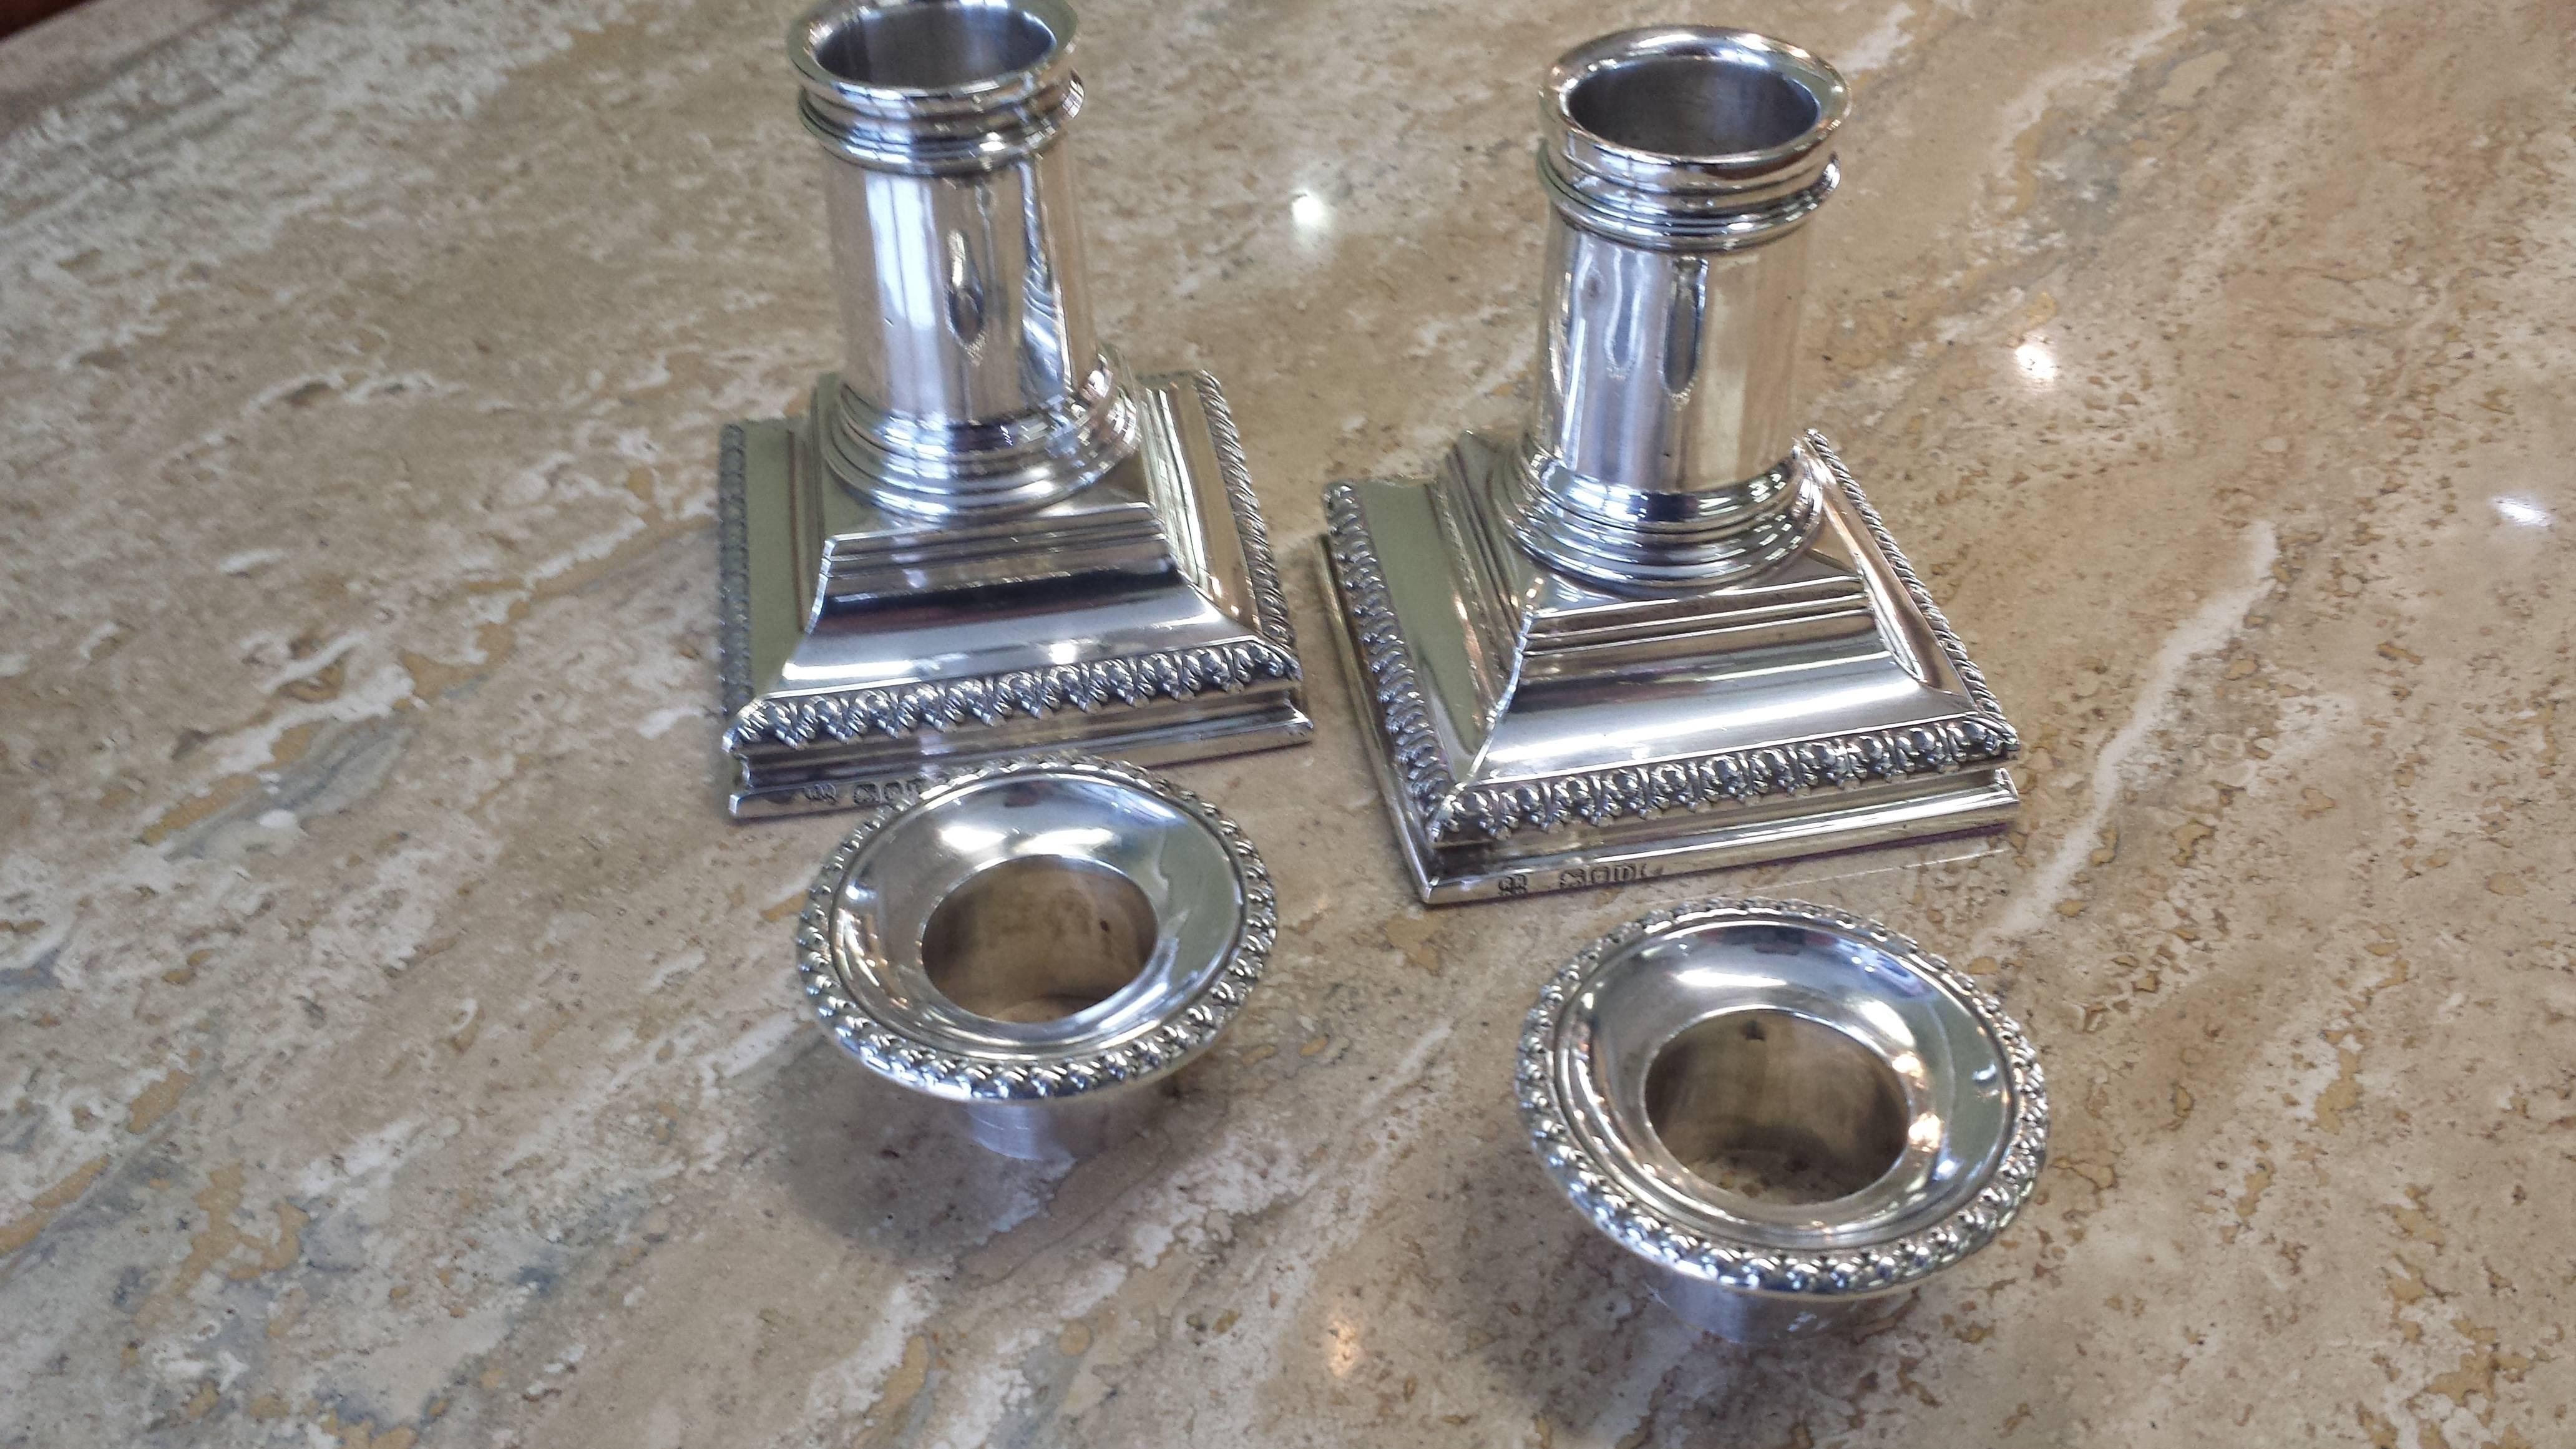 Late 19th Century Sterling Silver Candlesticks, London by Richard Hodd & Son Hallmarked for 1879